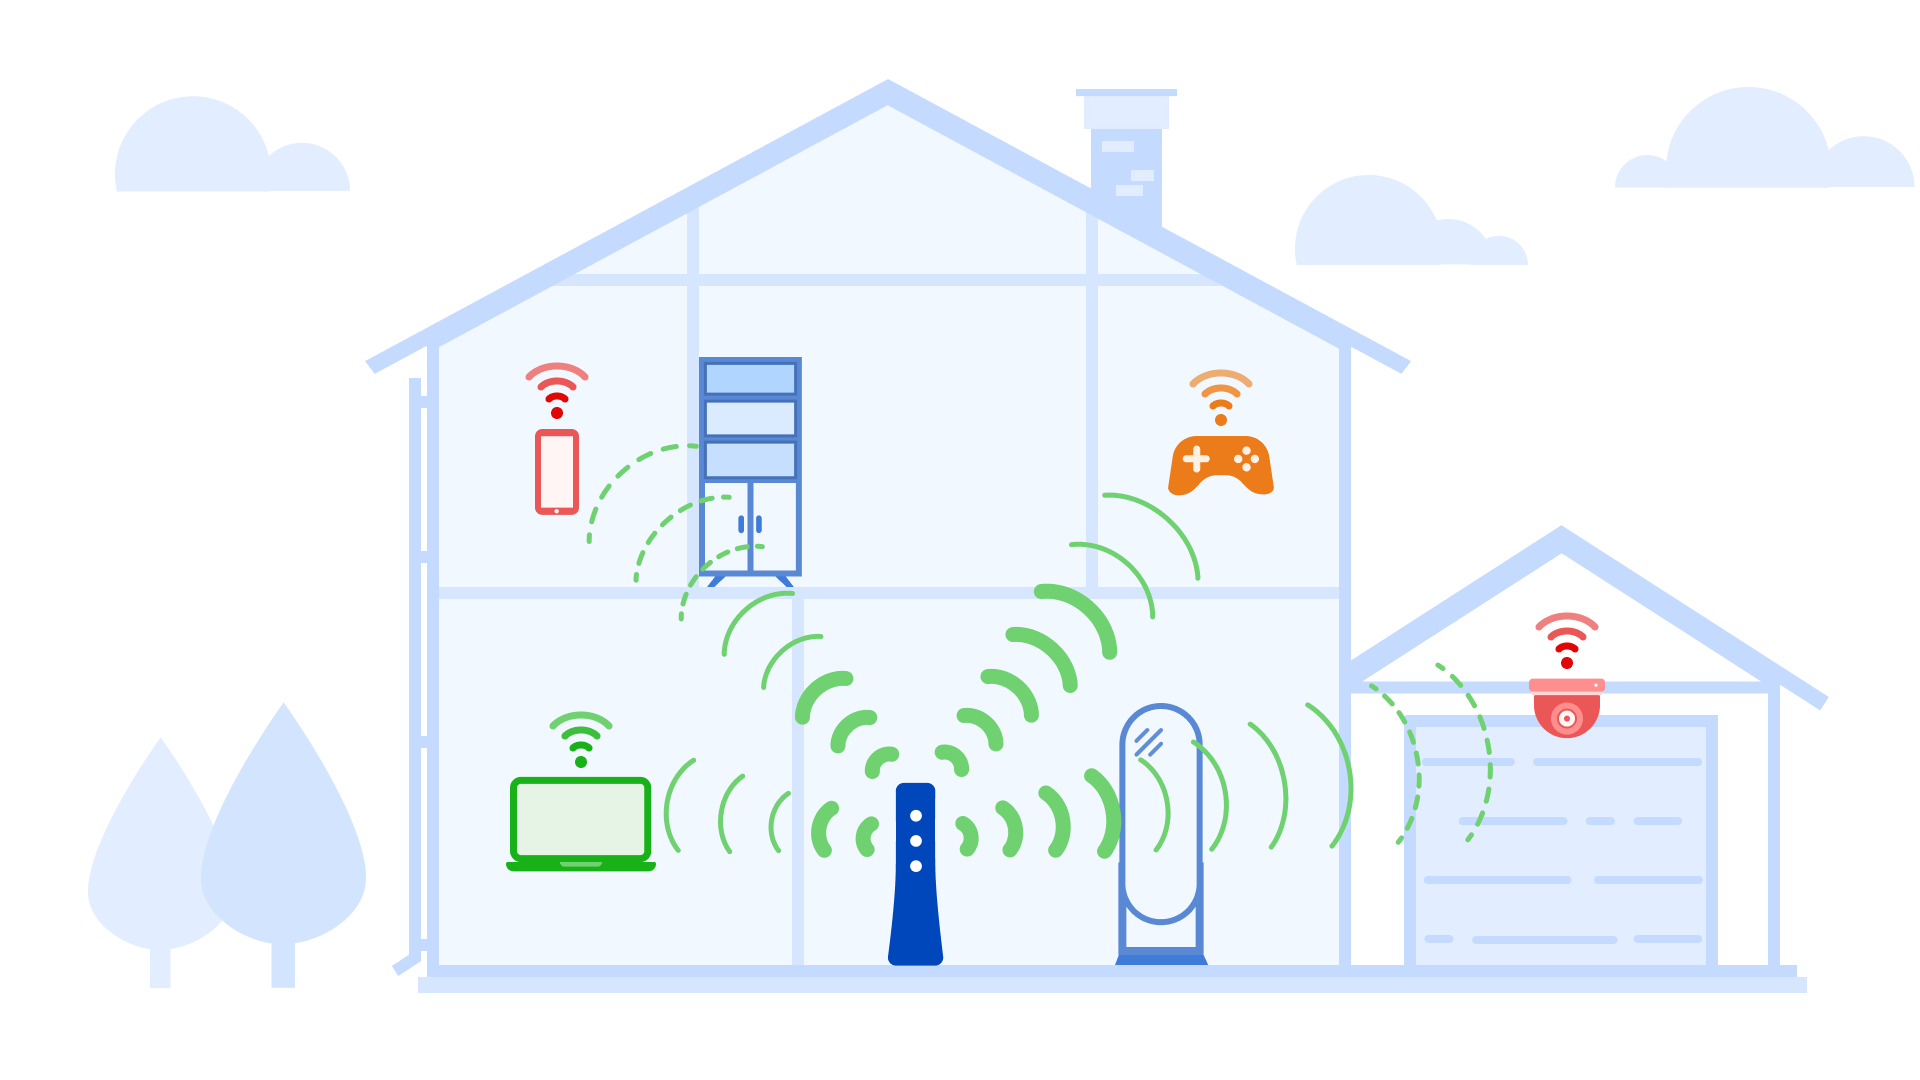 Illustration of walls, floors, and distance weakening WiFi signal strength